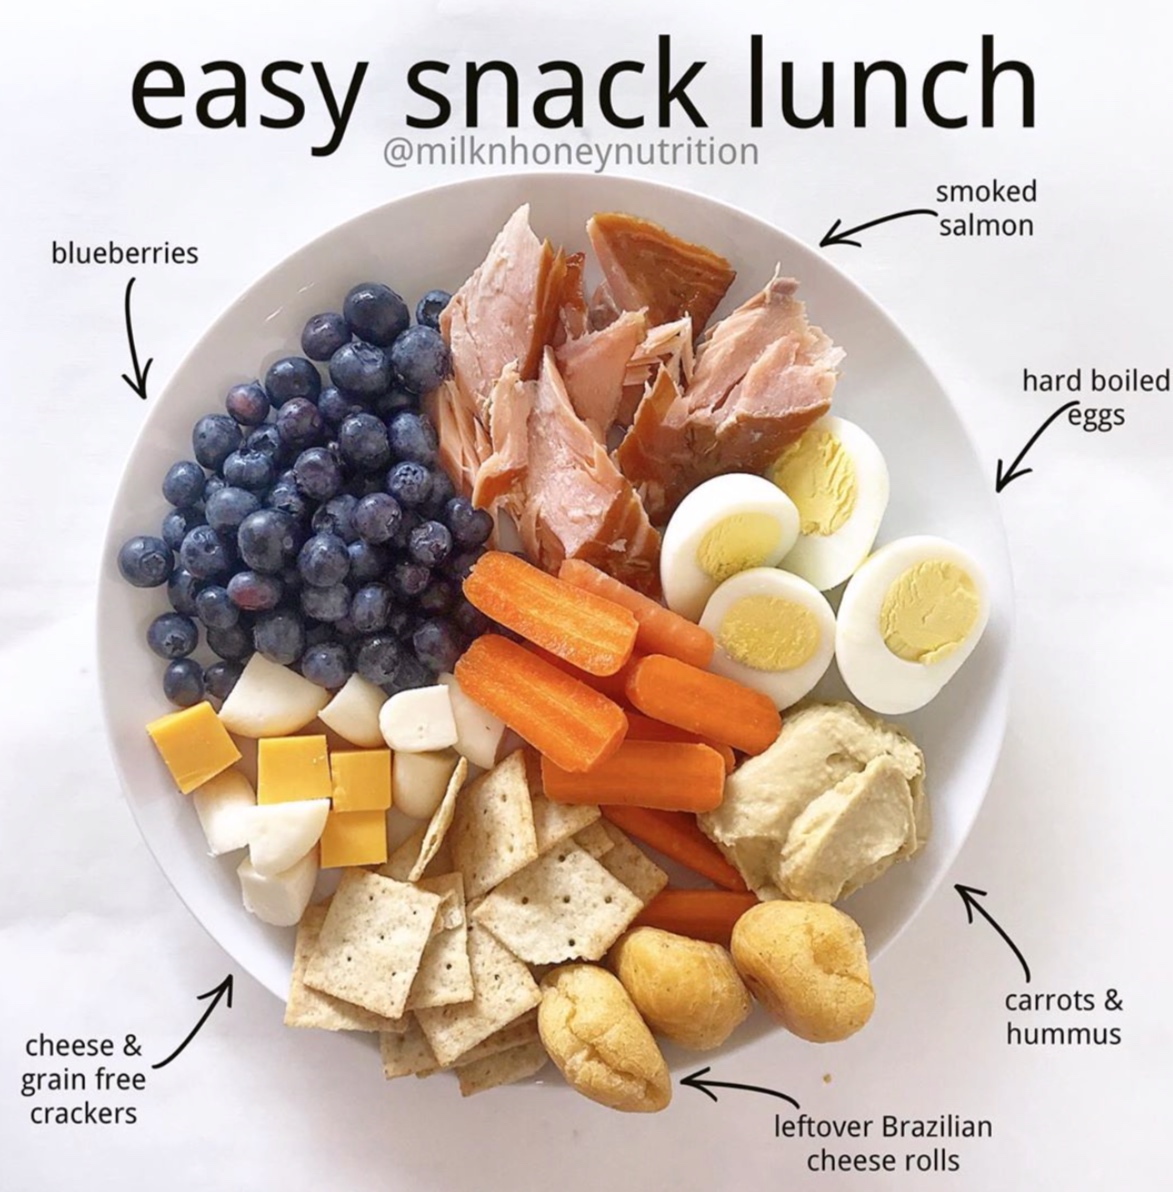 https://www.milkandhoneynutrition.com/wp-content/uploads/2020/02/Snack-lunch-and-snack-dinner-THE-5-minute-meal-solution-1.jpeg